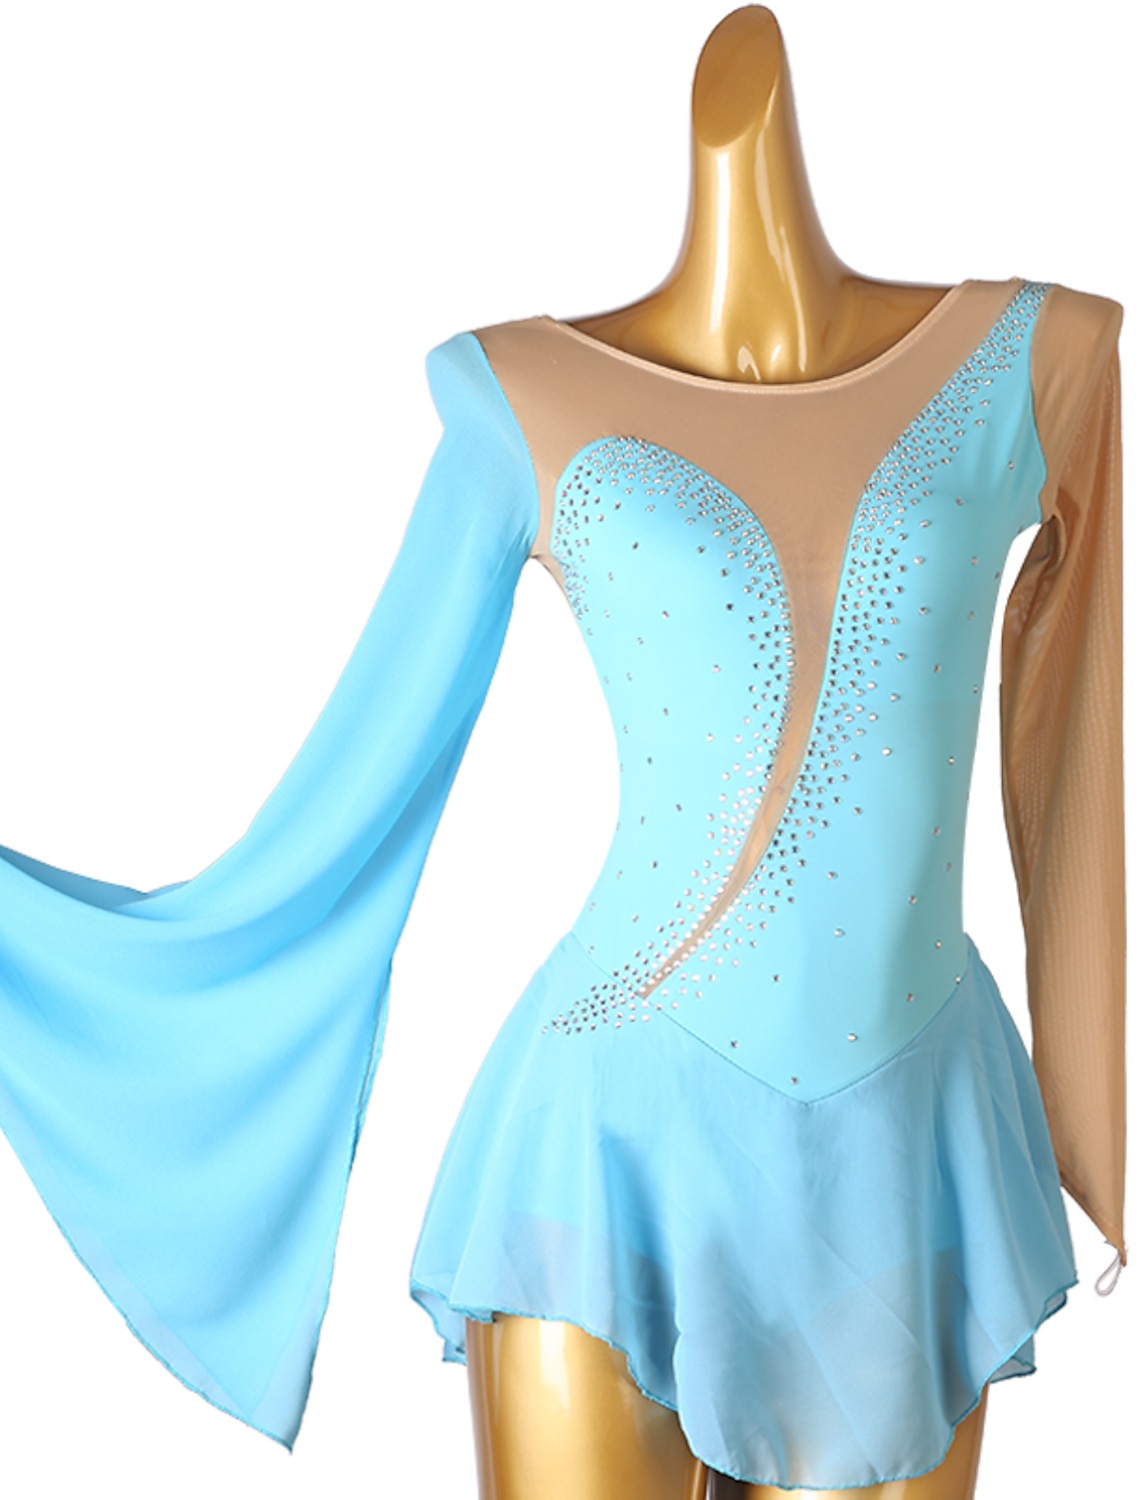 Ice skating dress Competition Figure Skating Classic Costume blue 